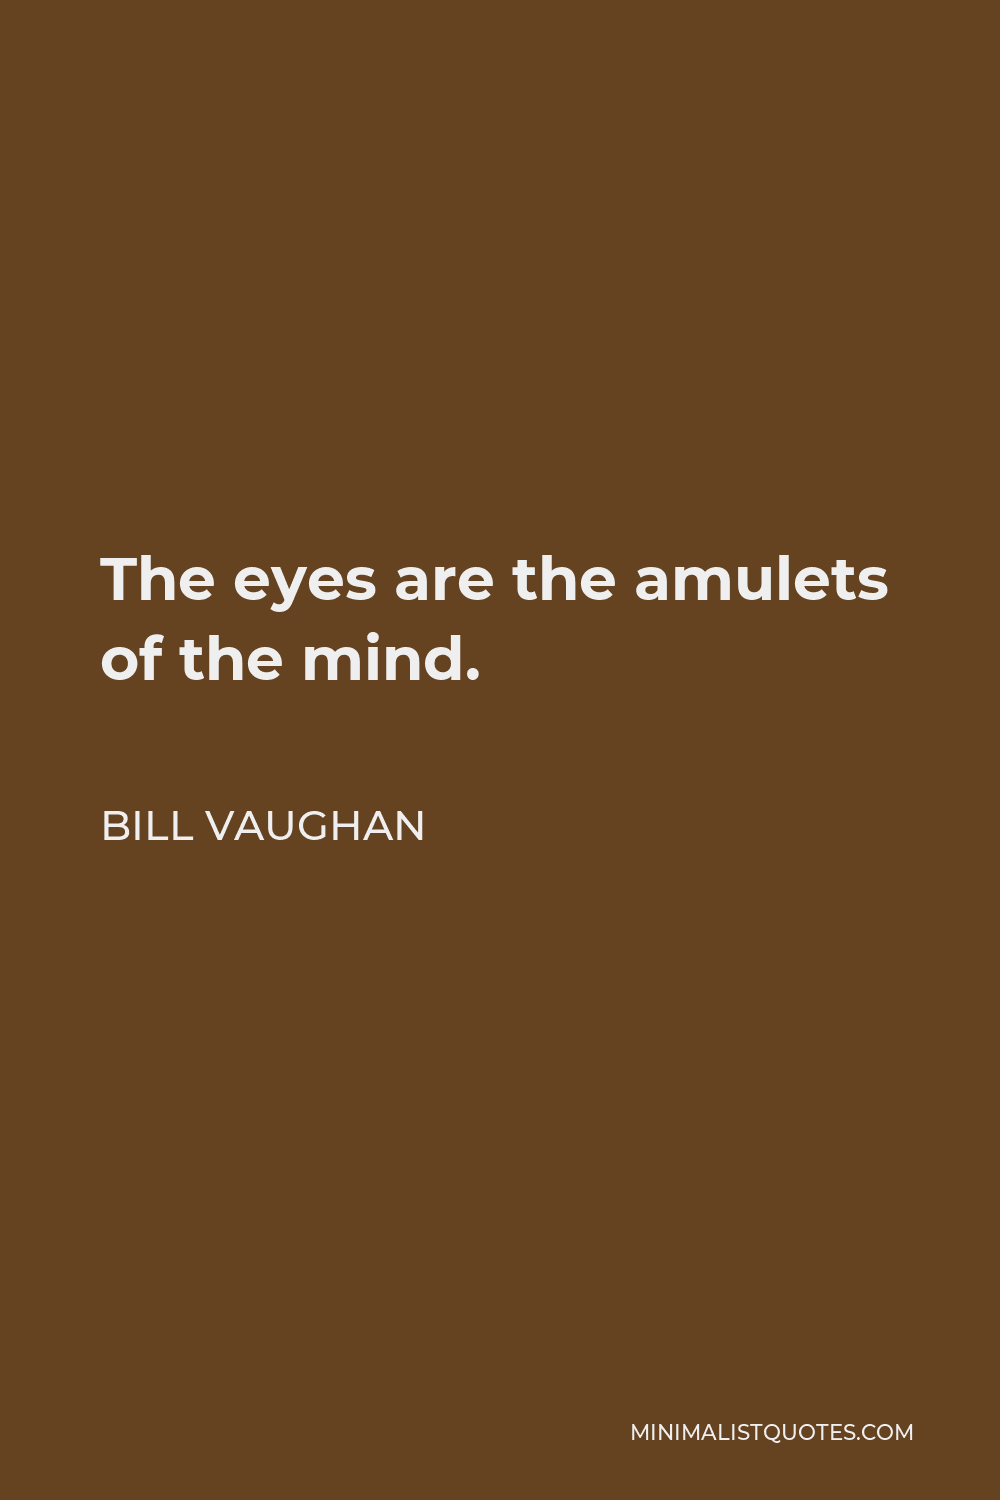 Bill Vaughan Quote - The eyes are the amulets of the mind.